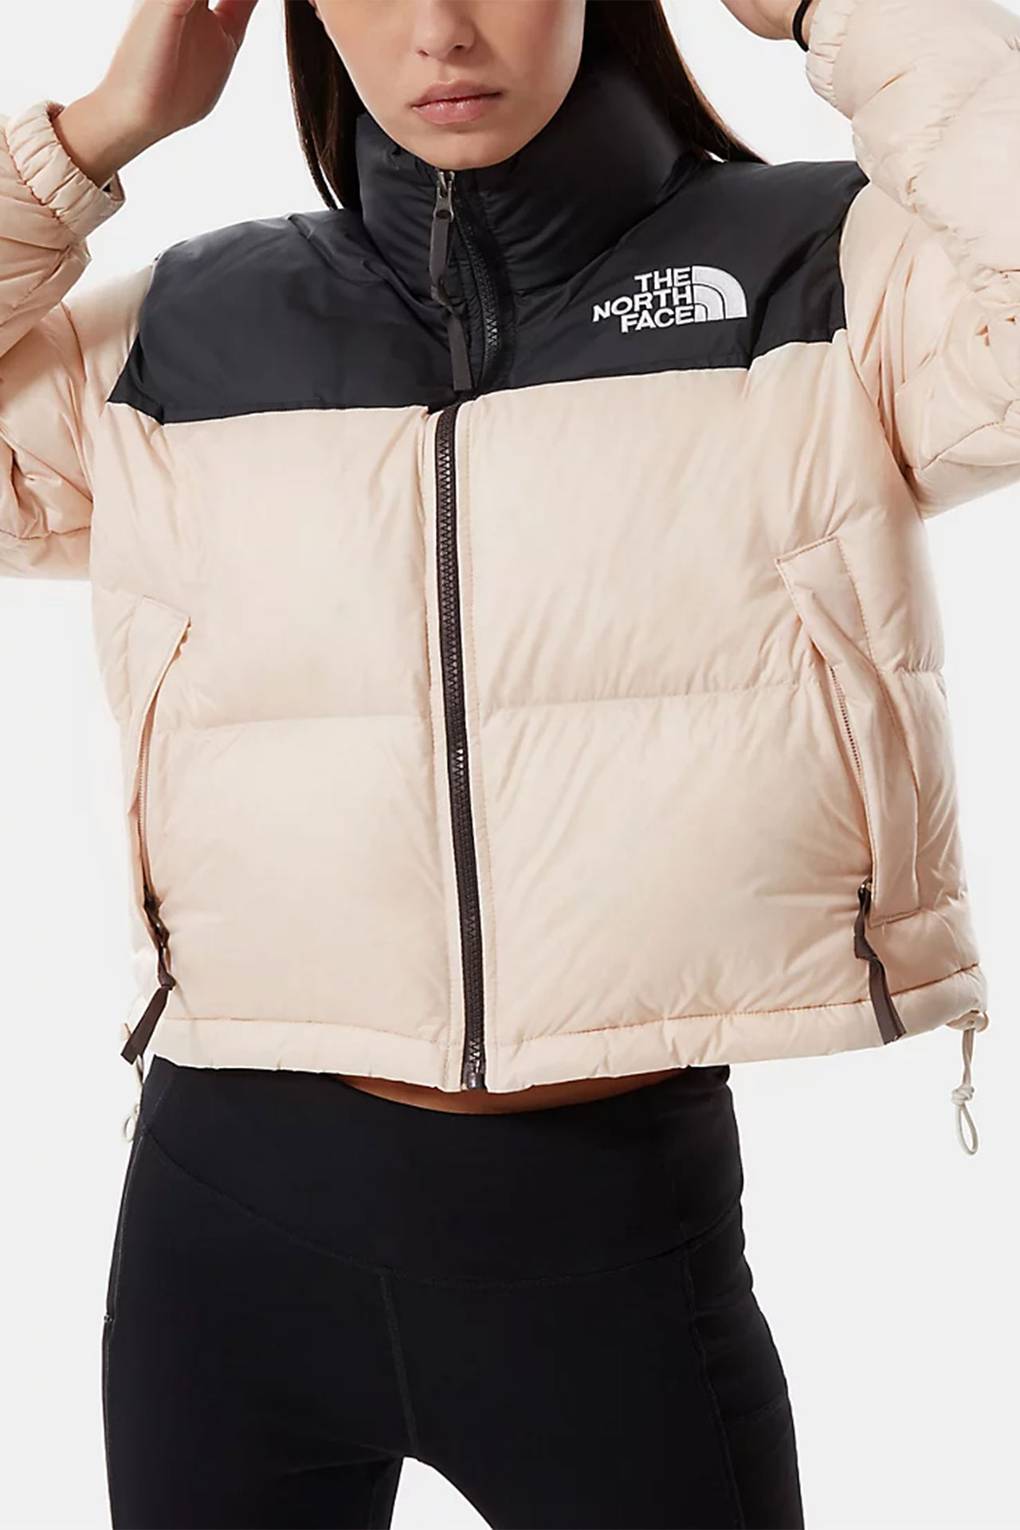 10 Best North Face Puffer Jackets Which 